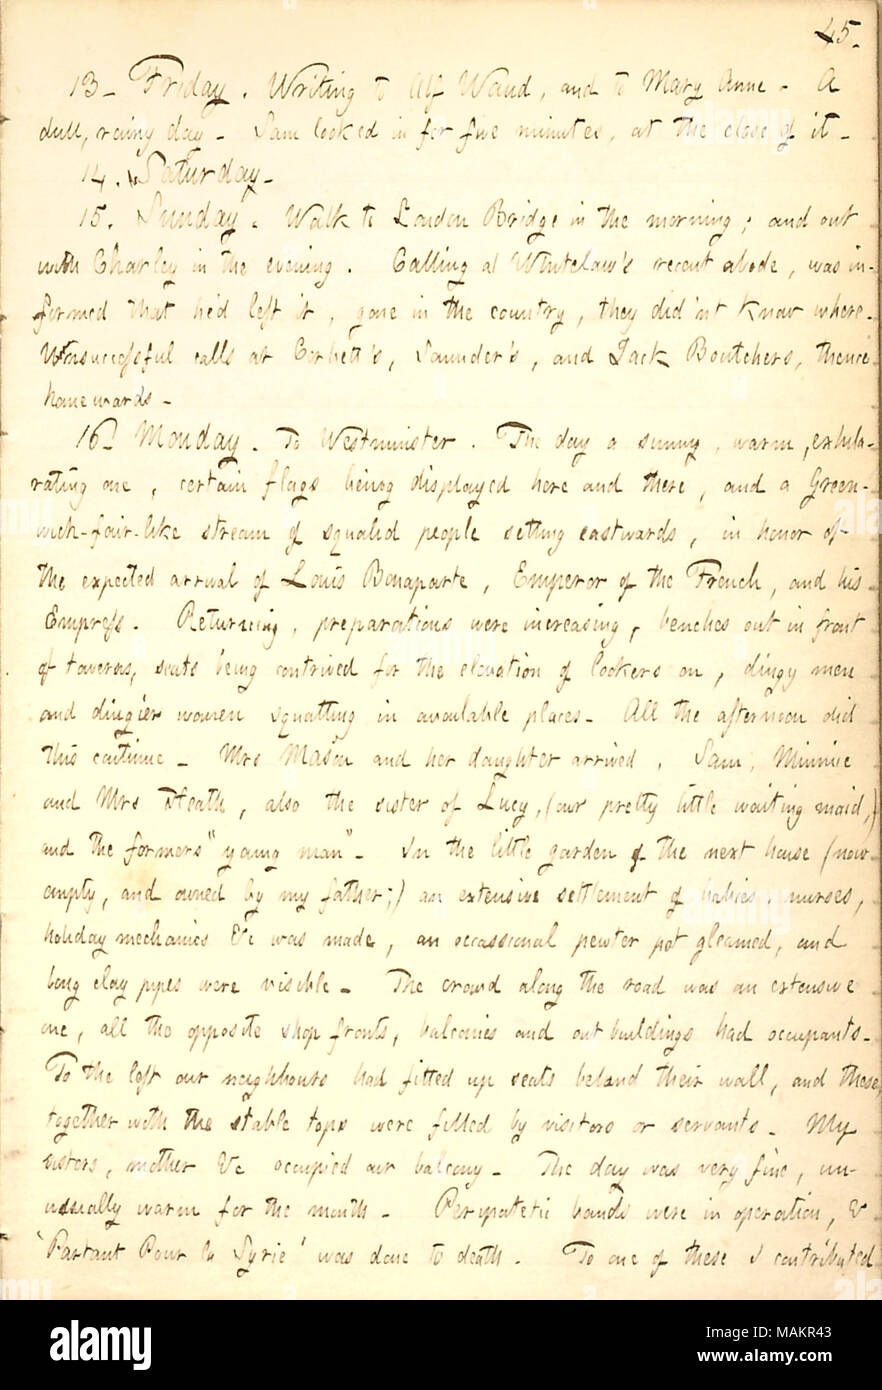 Describes attending a procession for Louis Napoleon in London.  Transcription: 13. Friday. Writing to Alf Waud, and to Mary Anne [Greatbatch]. A dull, rainy day. Sam [Gunn] looked in for five minutes, at the close of it. 14. Saturday. 15. Sunday. Walk to London Bridge in the morning; and out with Charley [Gunn] in the evening. Calling at [Matthew] Whitelaw ?s recent abode, was informed that he ?d left it, gone in the country, they did ?nt know where. Unsuccessful calls at Corbett ?s, Saunder ?s, and Jack Boutcher ?s, thence homewards. 16. Monday. To Westminster. The day a sunny, warm, exhilara Stock Photo